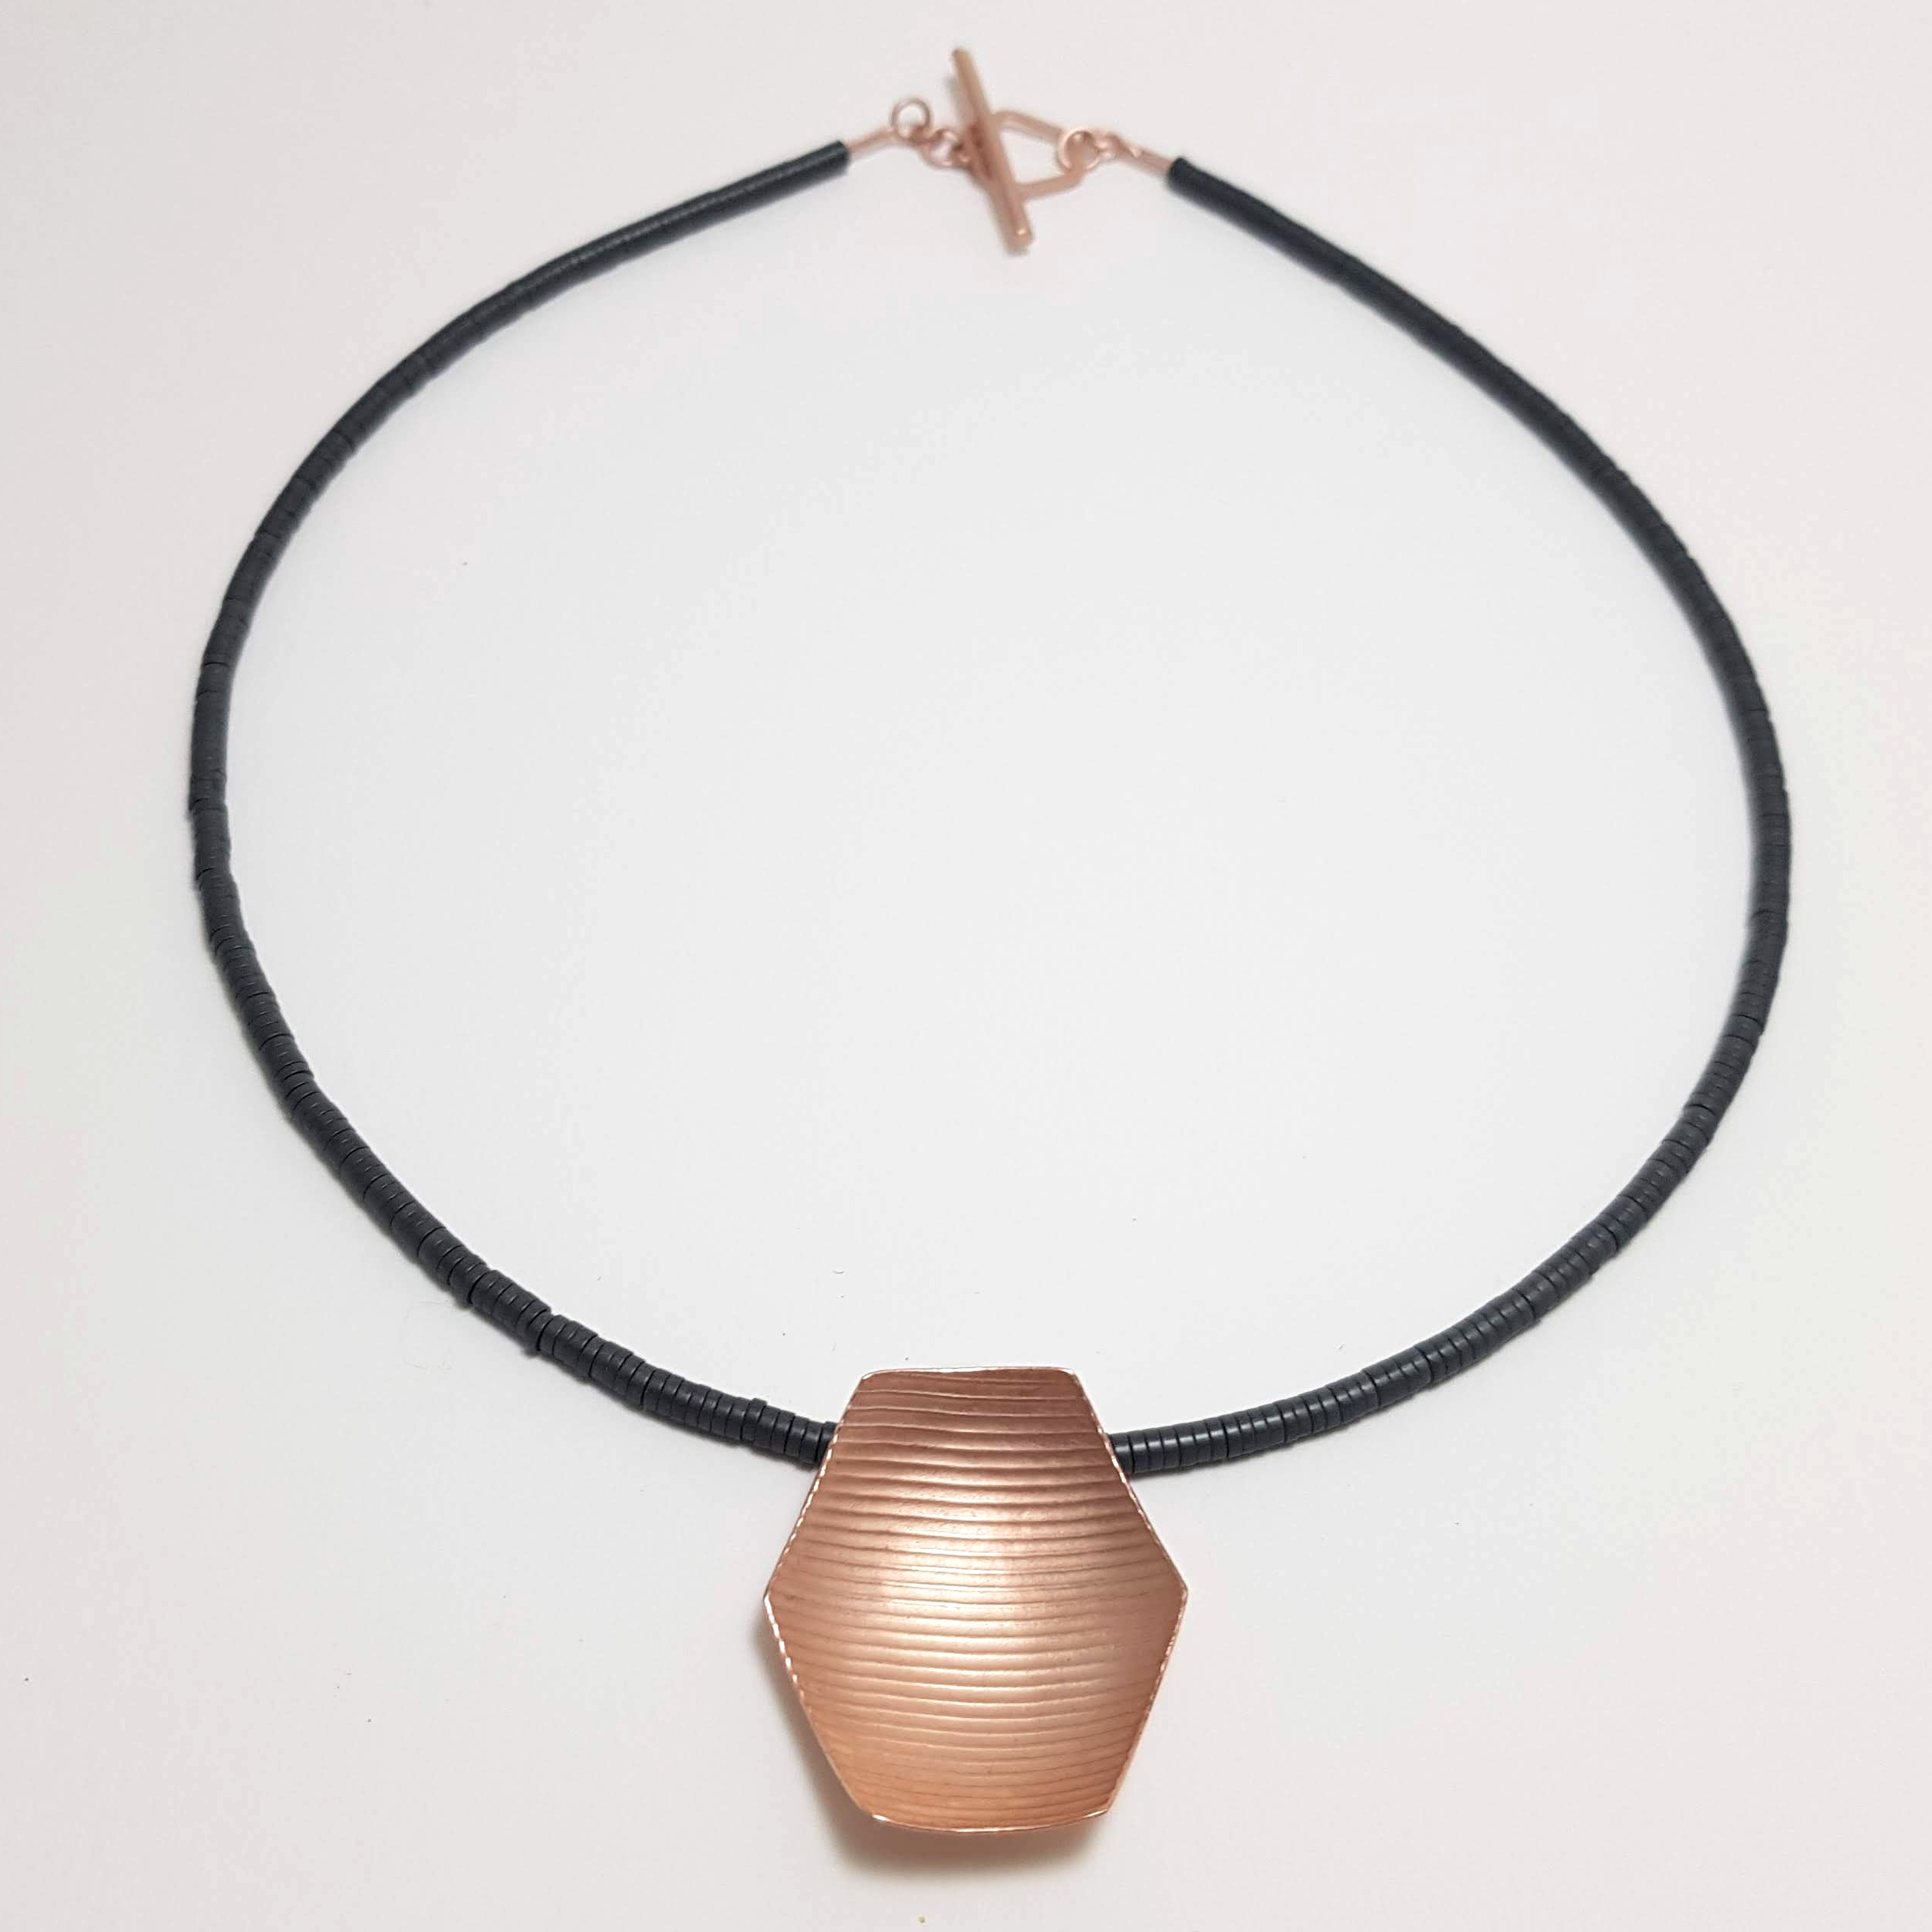 'Polygon' necklace | Necklaces / Pendants by Donna Barry